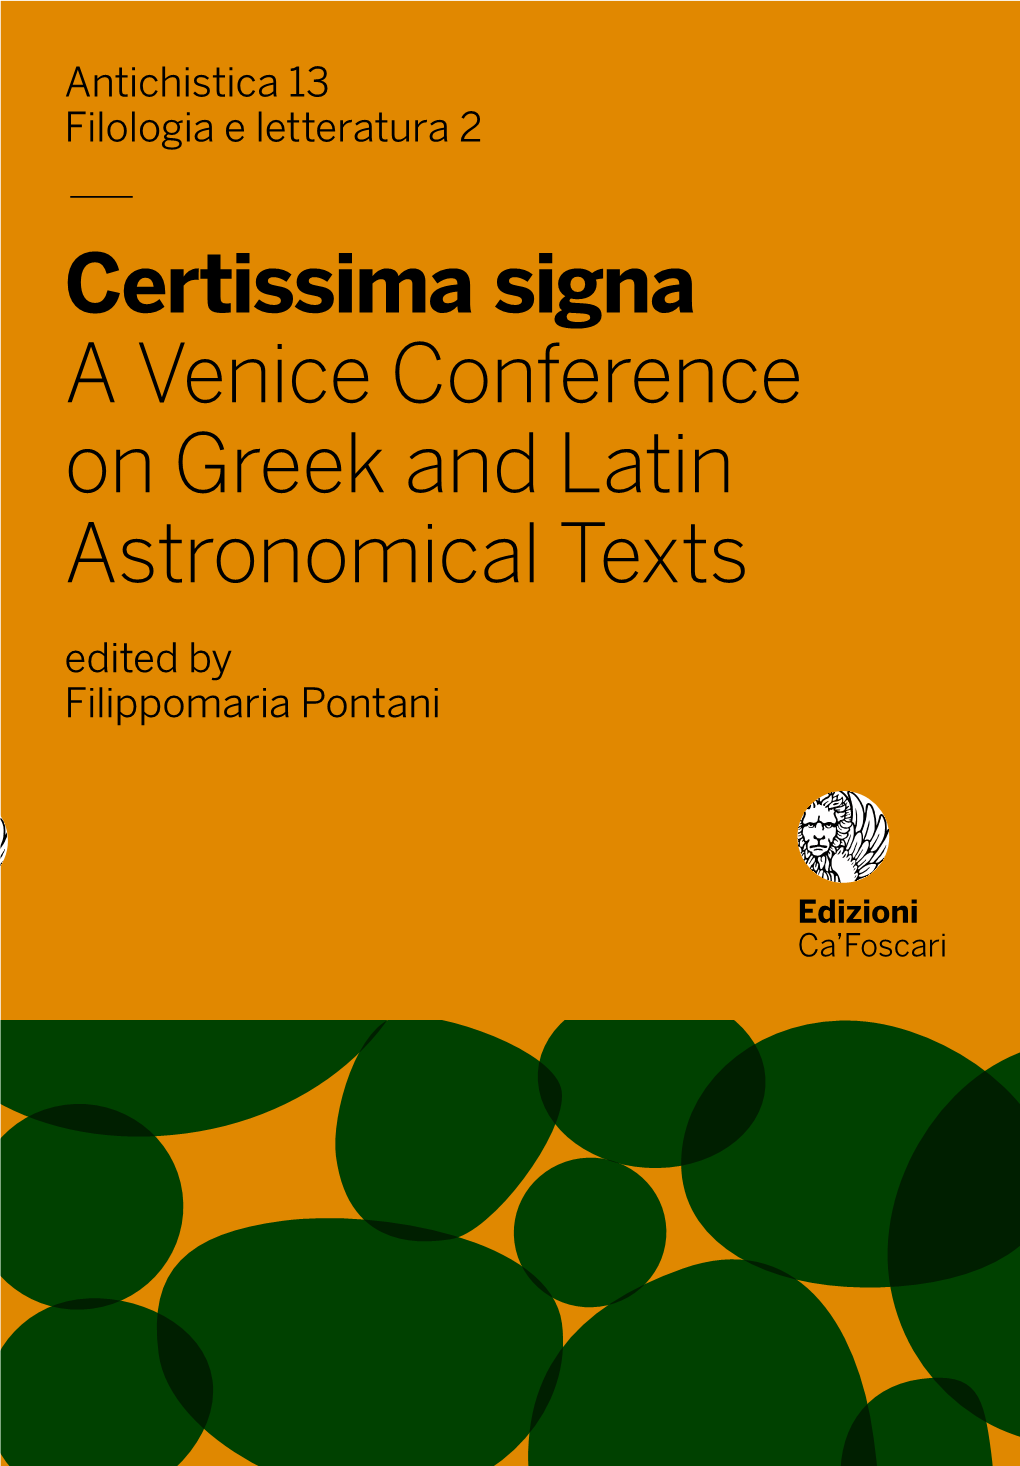 — Certissima Signa a Venice Conference on Greek and Latin Astronomical Texts Edited by Filippomaria Pontani